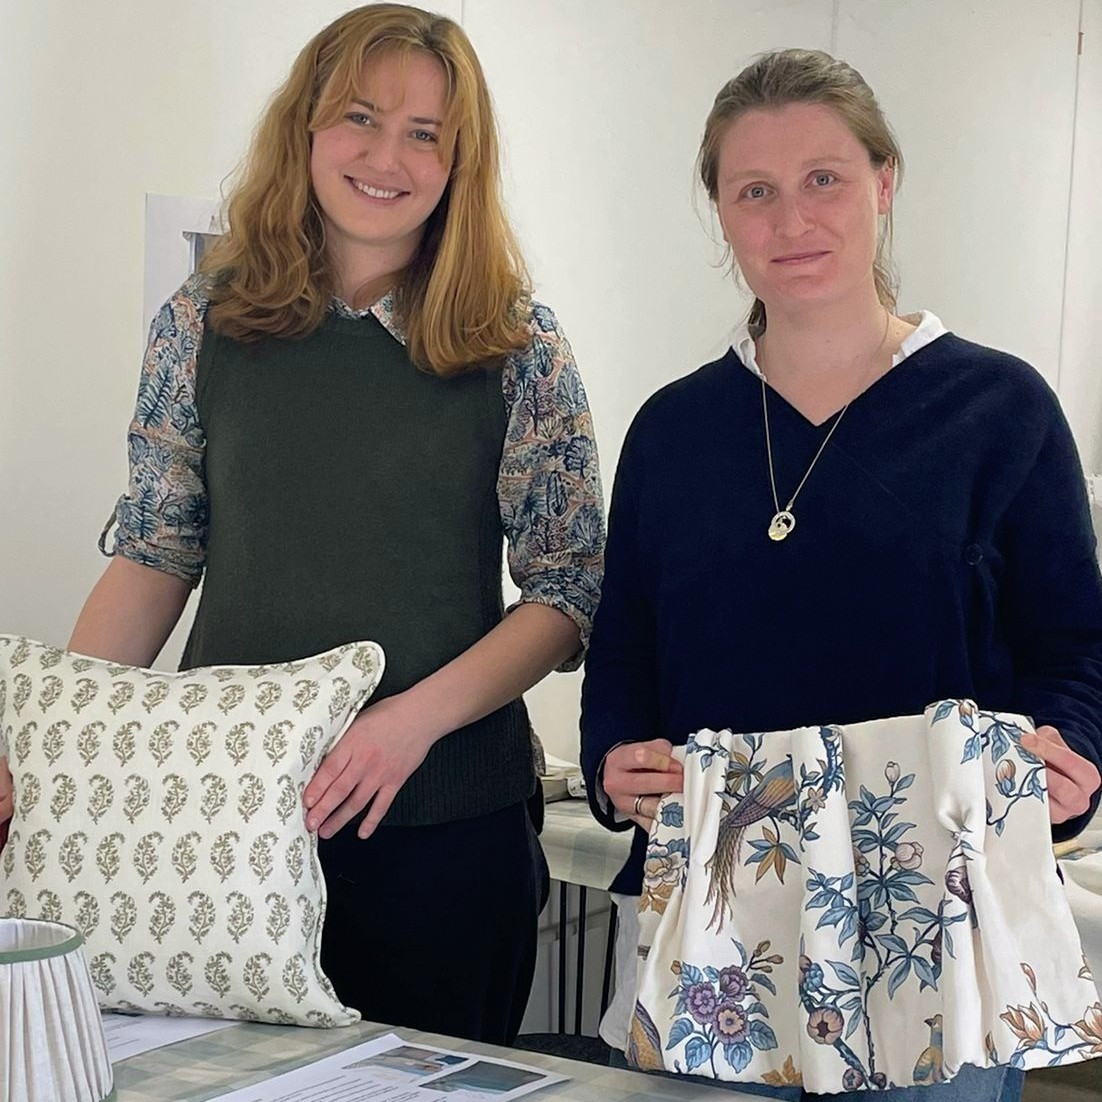 Earlier this month, we held an open day at our @HighgroveGarden education centres. Members of the public were invited to tour our craft workshops and hear more about the training programmes available. If you couldn’t make it along, find out more via tinyurl.com/TrainingAtHG